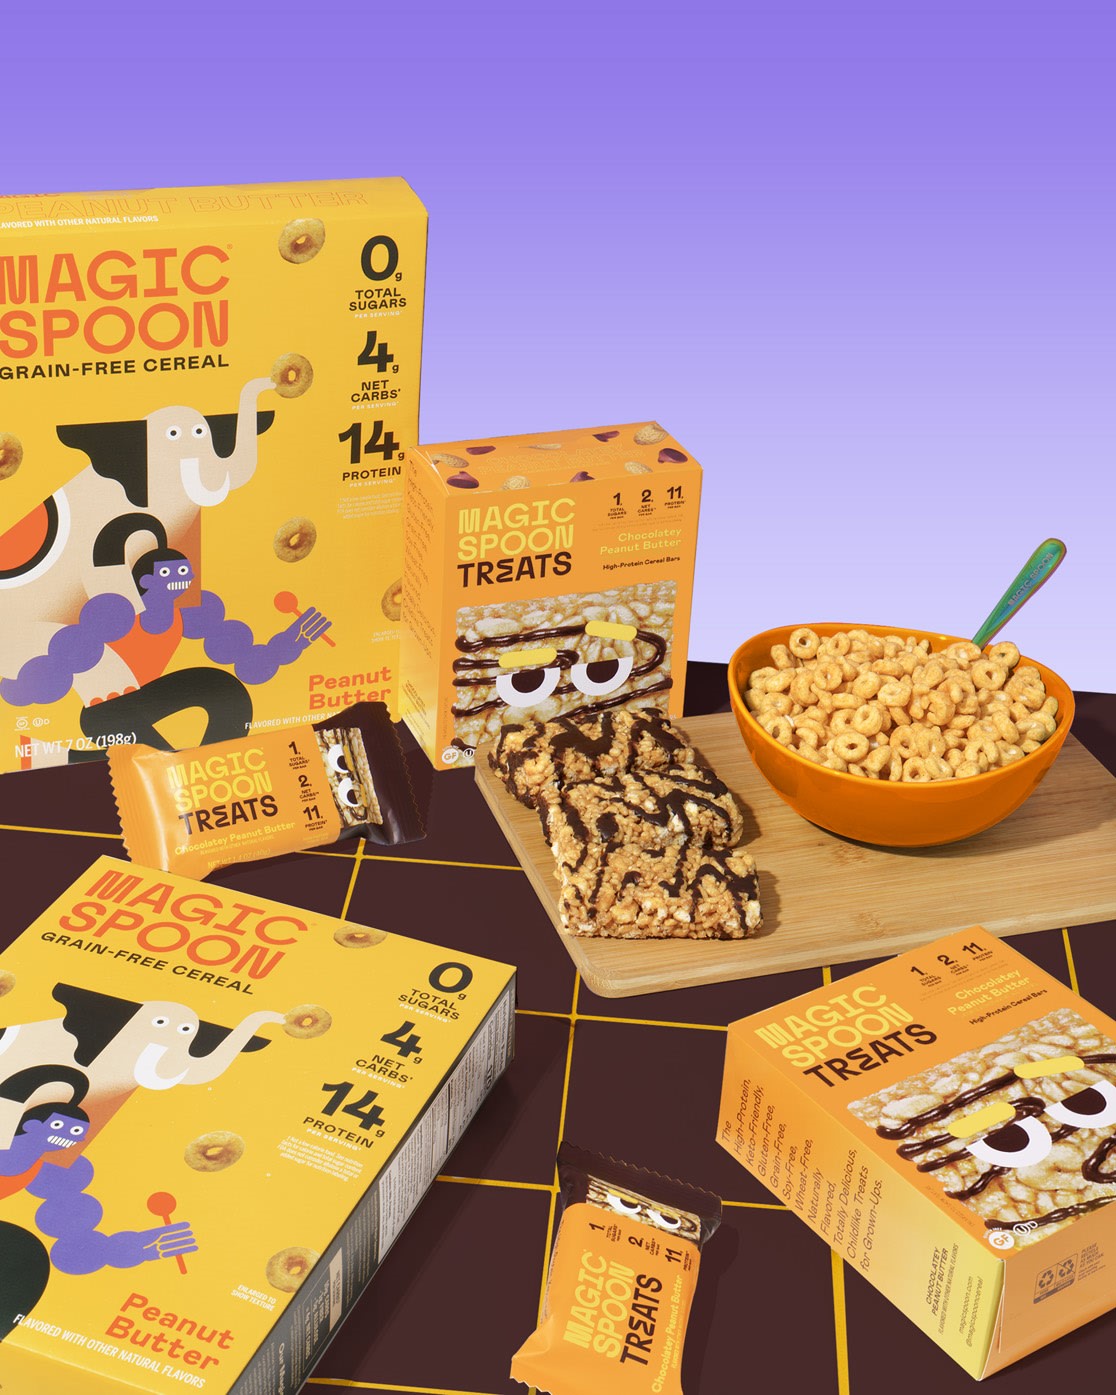 Magic Spoon reinvented sugar cereal nostalgia. Now it’s taking aim at Rice Krispies treats | DeviceDaily.com